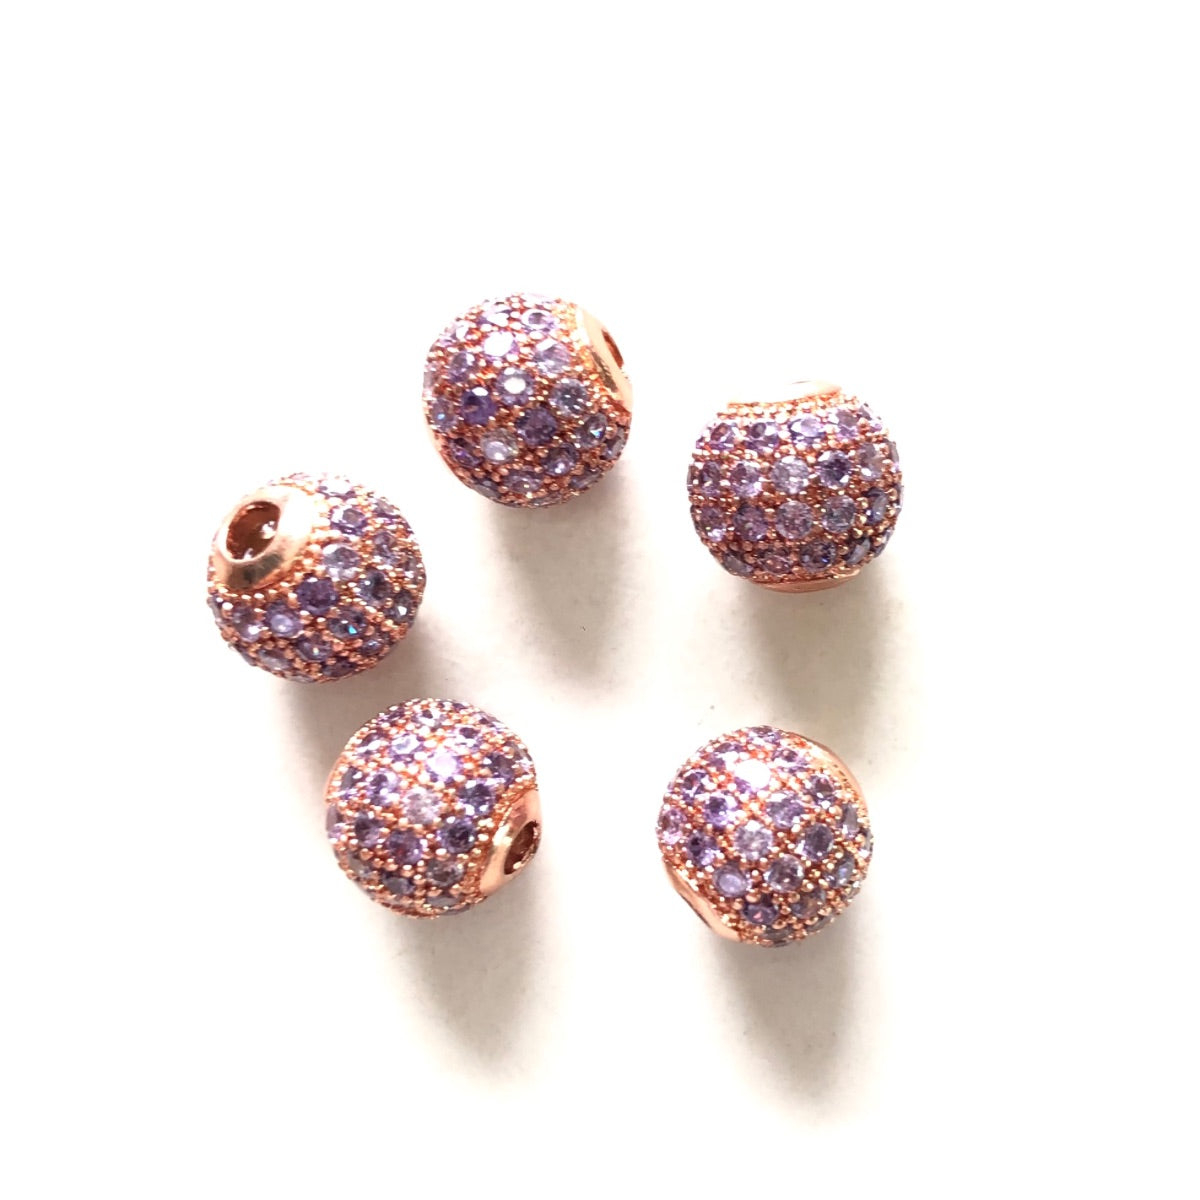 10pcs/lot 6mm, 8mm Colorful CZ Paved Ball Spacers Rose Gold Purple CZ Paved Spacers 6mm Beads 8mm Beads Ball Beads Colorful Zirconia New Spacers Arrivals Charms Beads Beyond